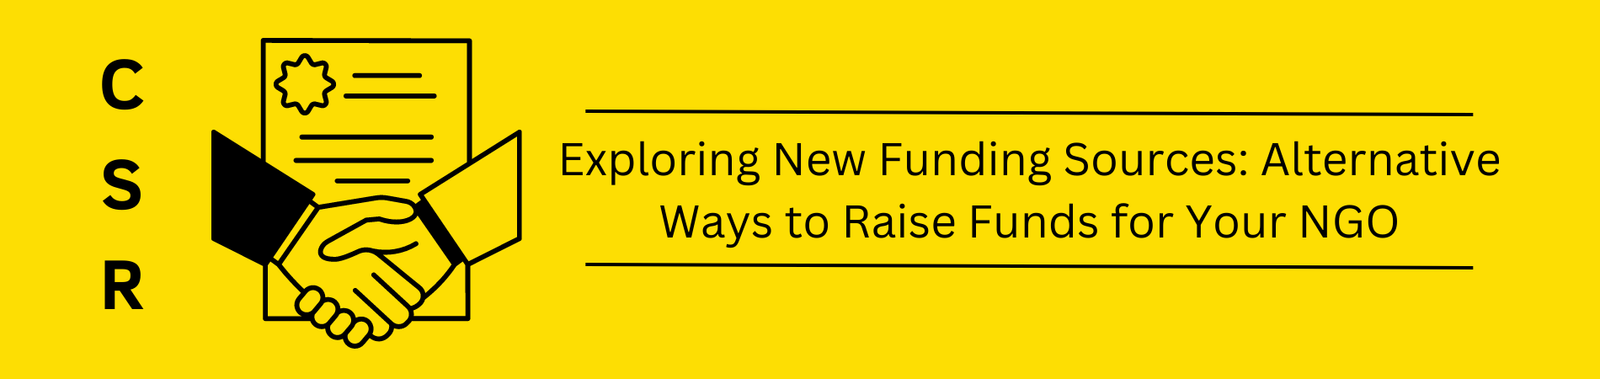 Exploring New Funding Sources: Alternative Ways to Raise Funds for Your NGO